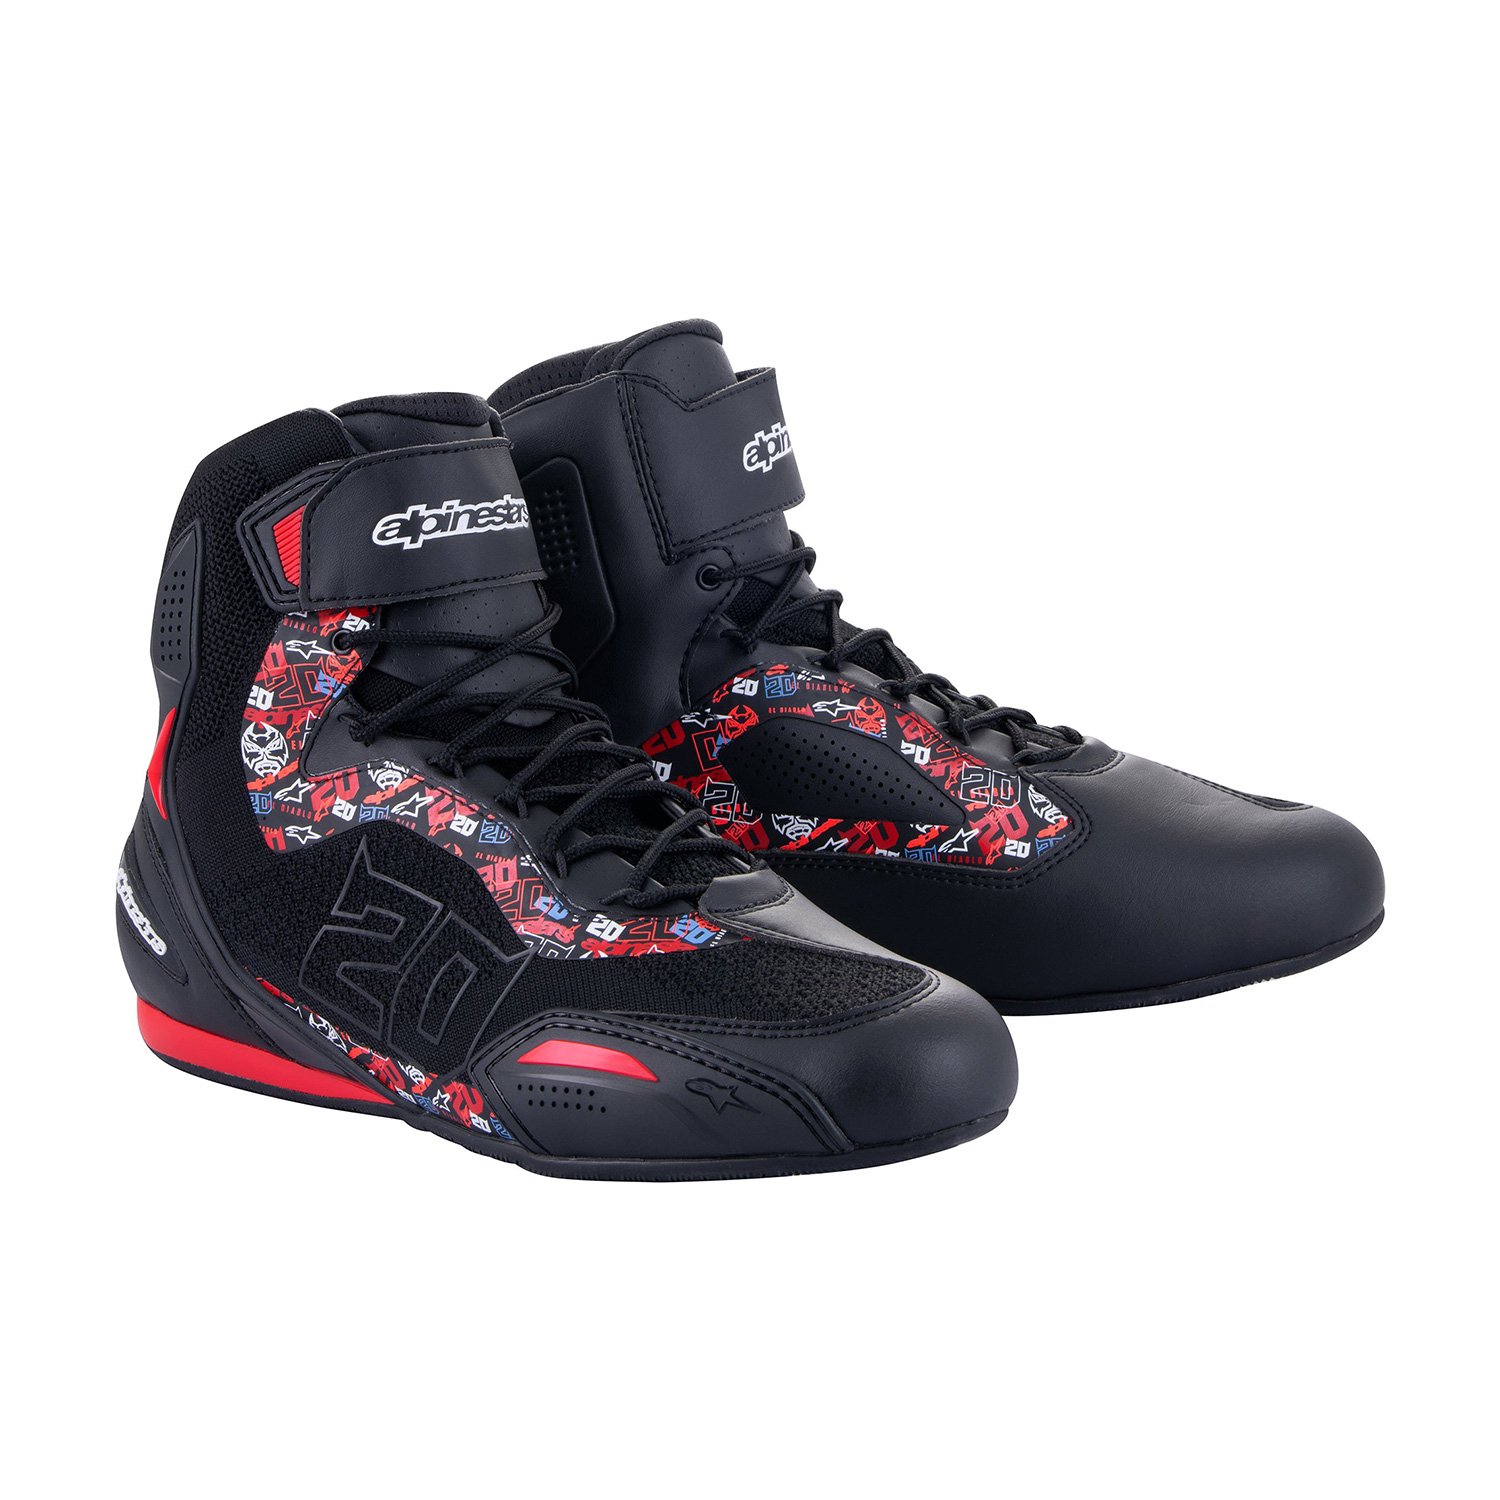 Image of Alpinestars FQ20 Faster-3 Rideknit Noir Bright Rouge Chaussures Taille US 14